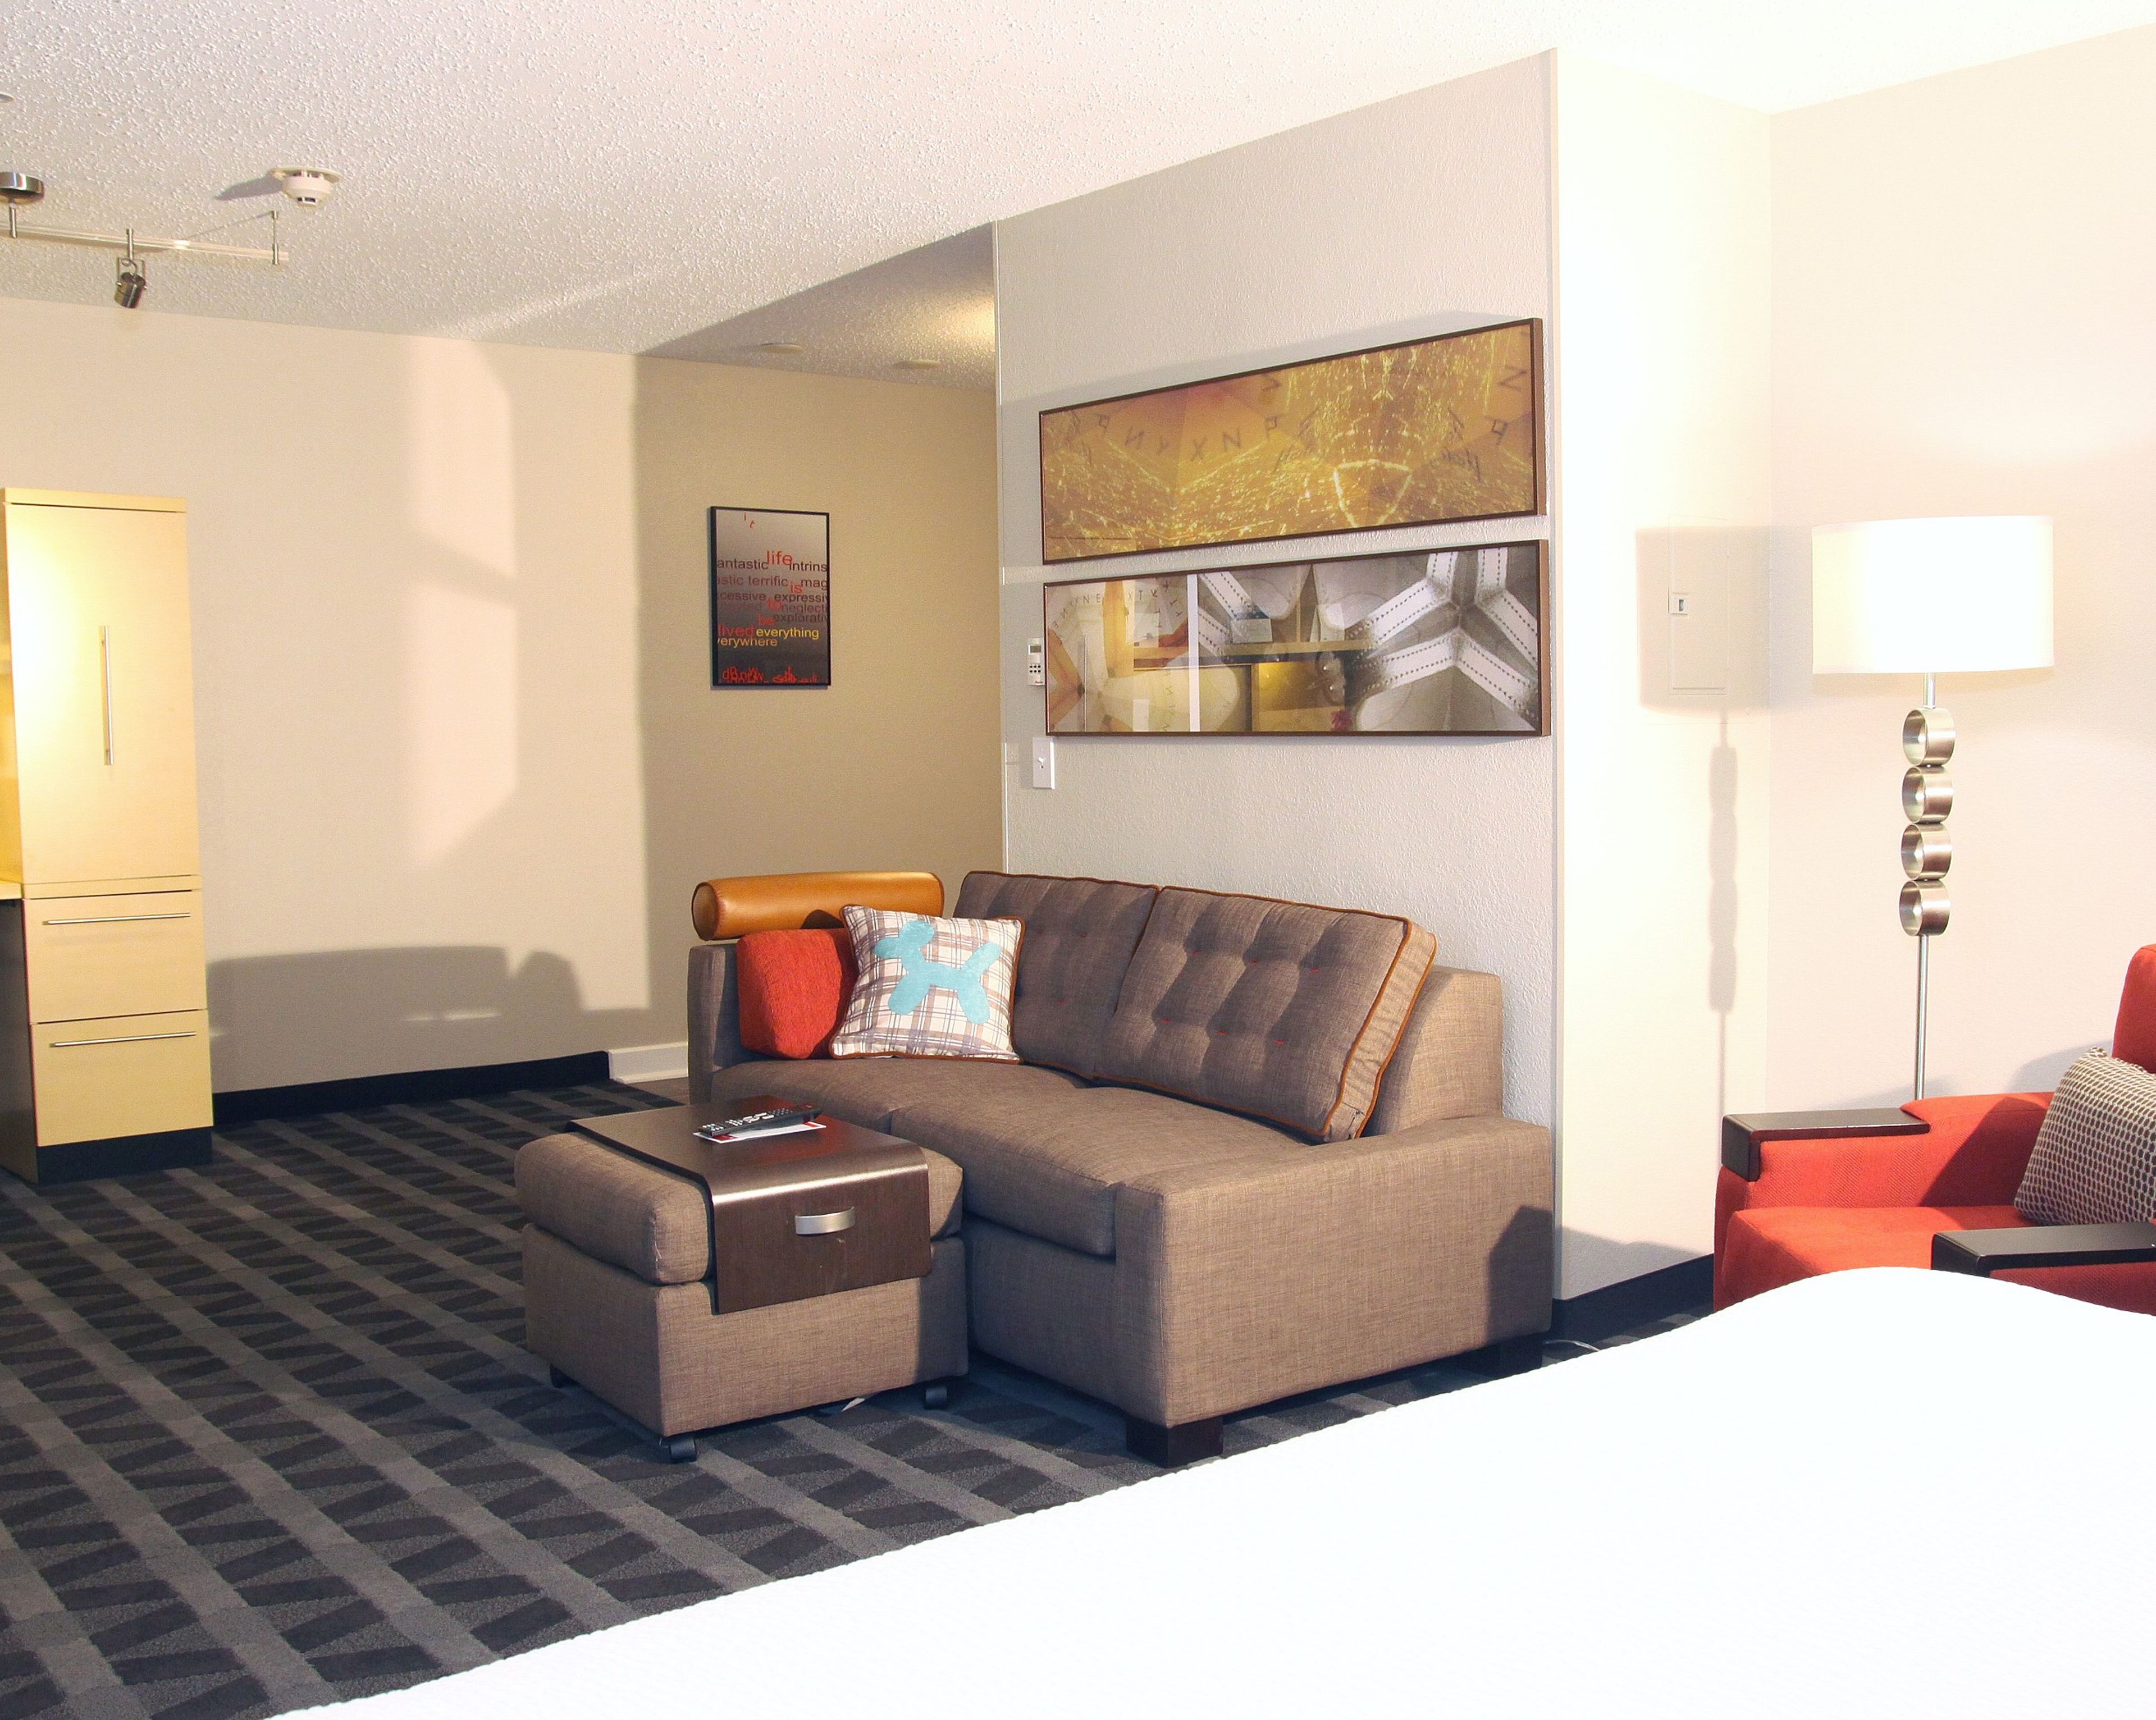 TownePlace Suites Albany Downtown/Medical Center